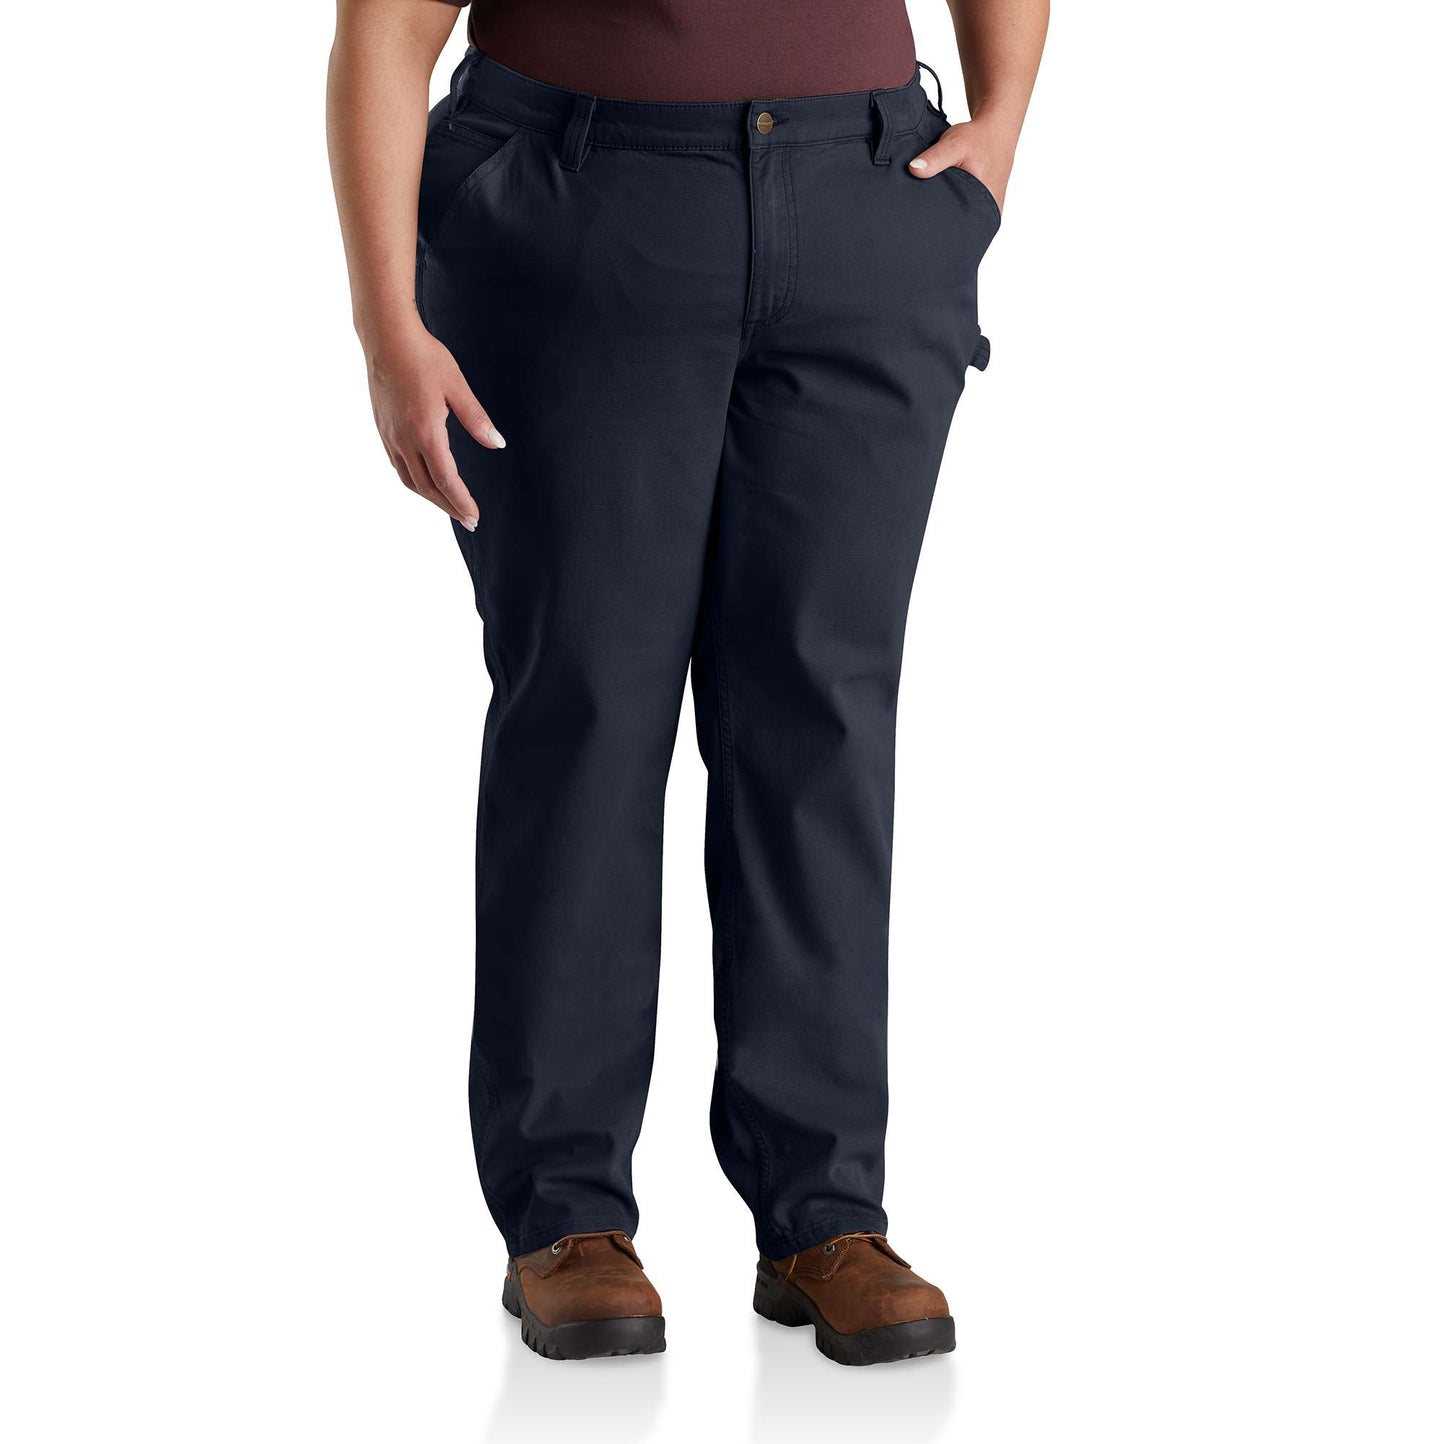 Women's Canvas Work Pant - Relaxed Fit - Rugged Flex®